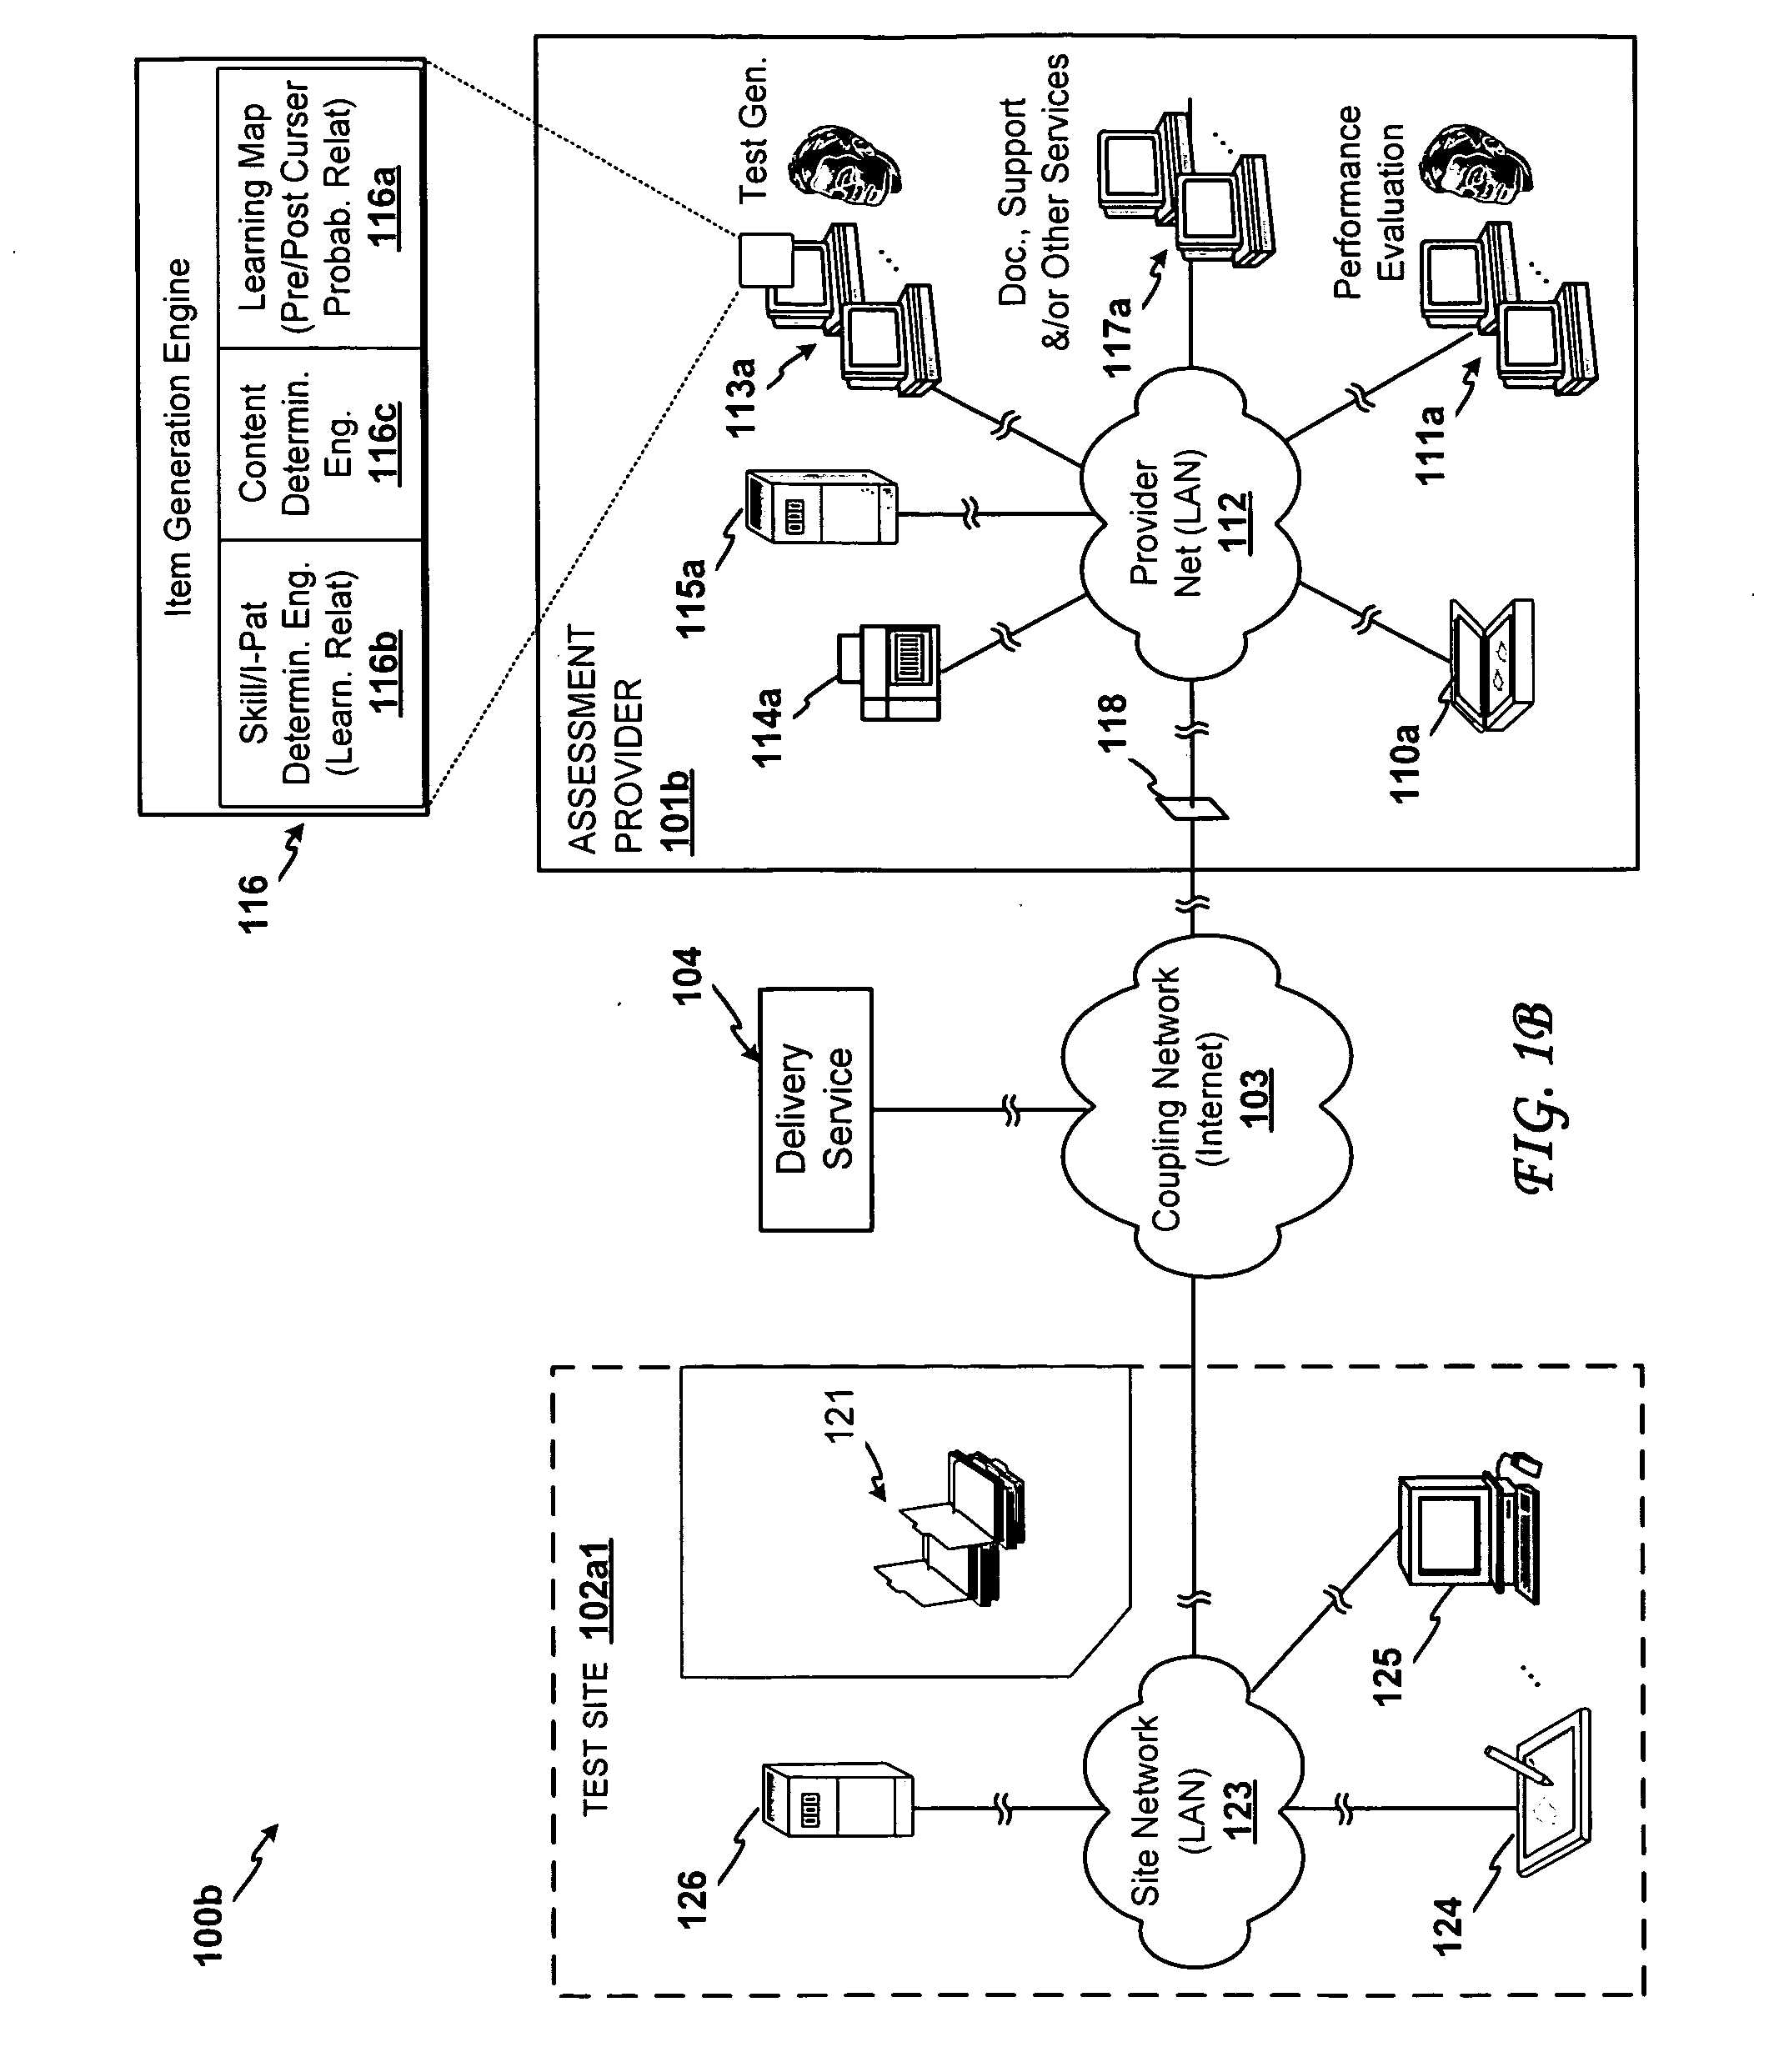 Patterned response system and method